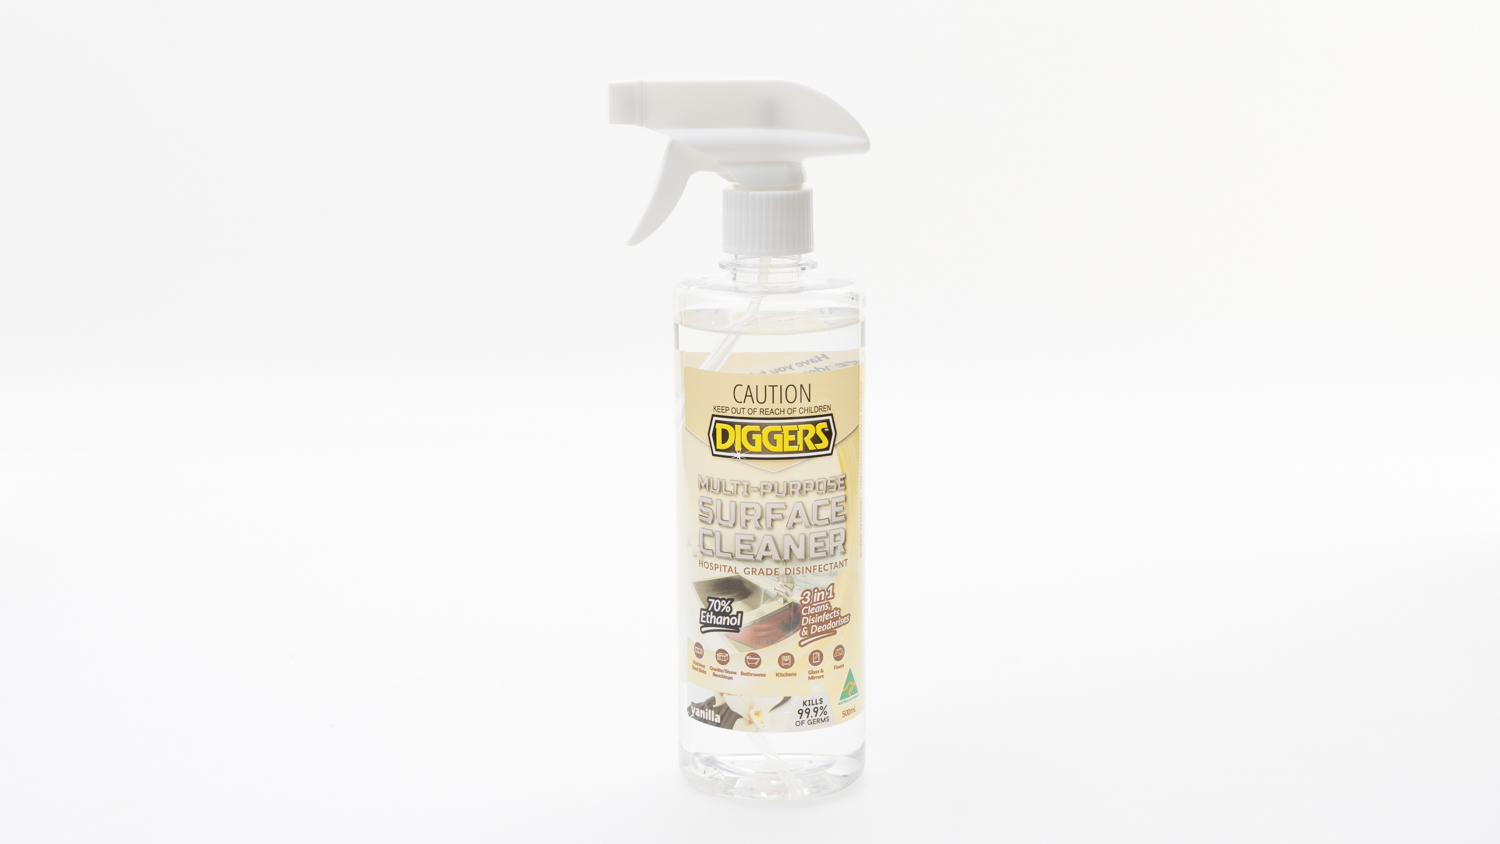 Diggers Multi-Purpose Surface Cleaner carousel image